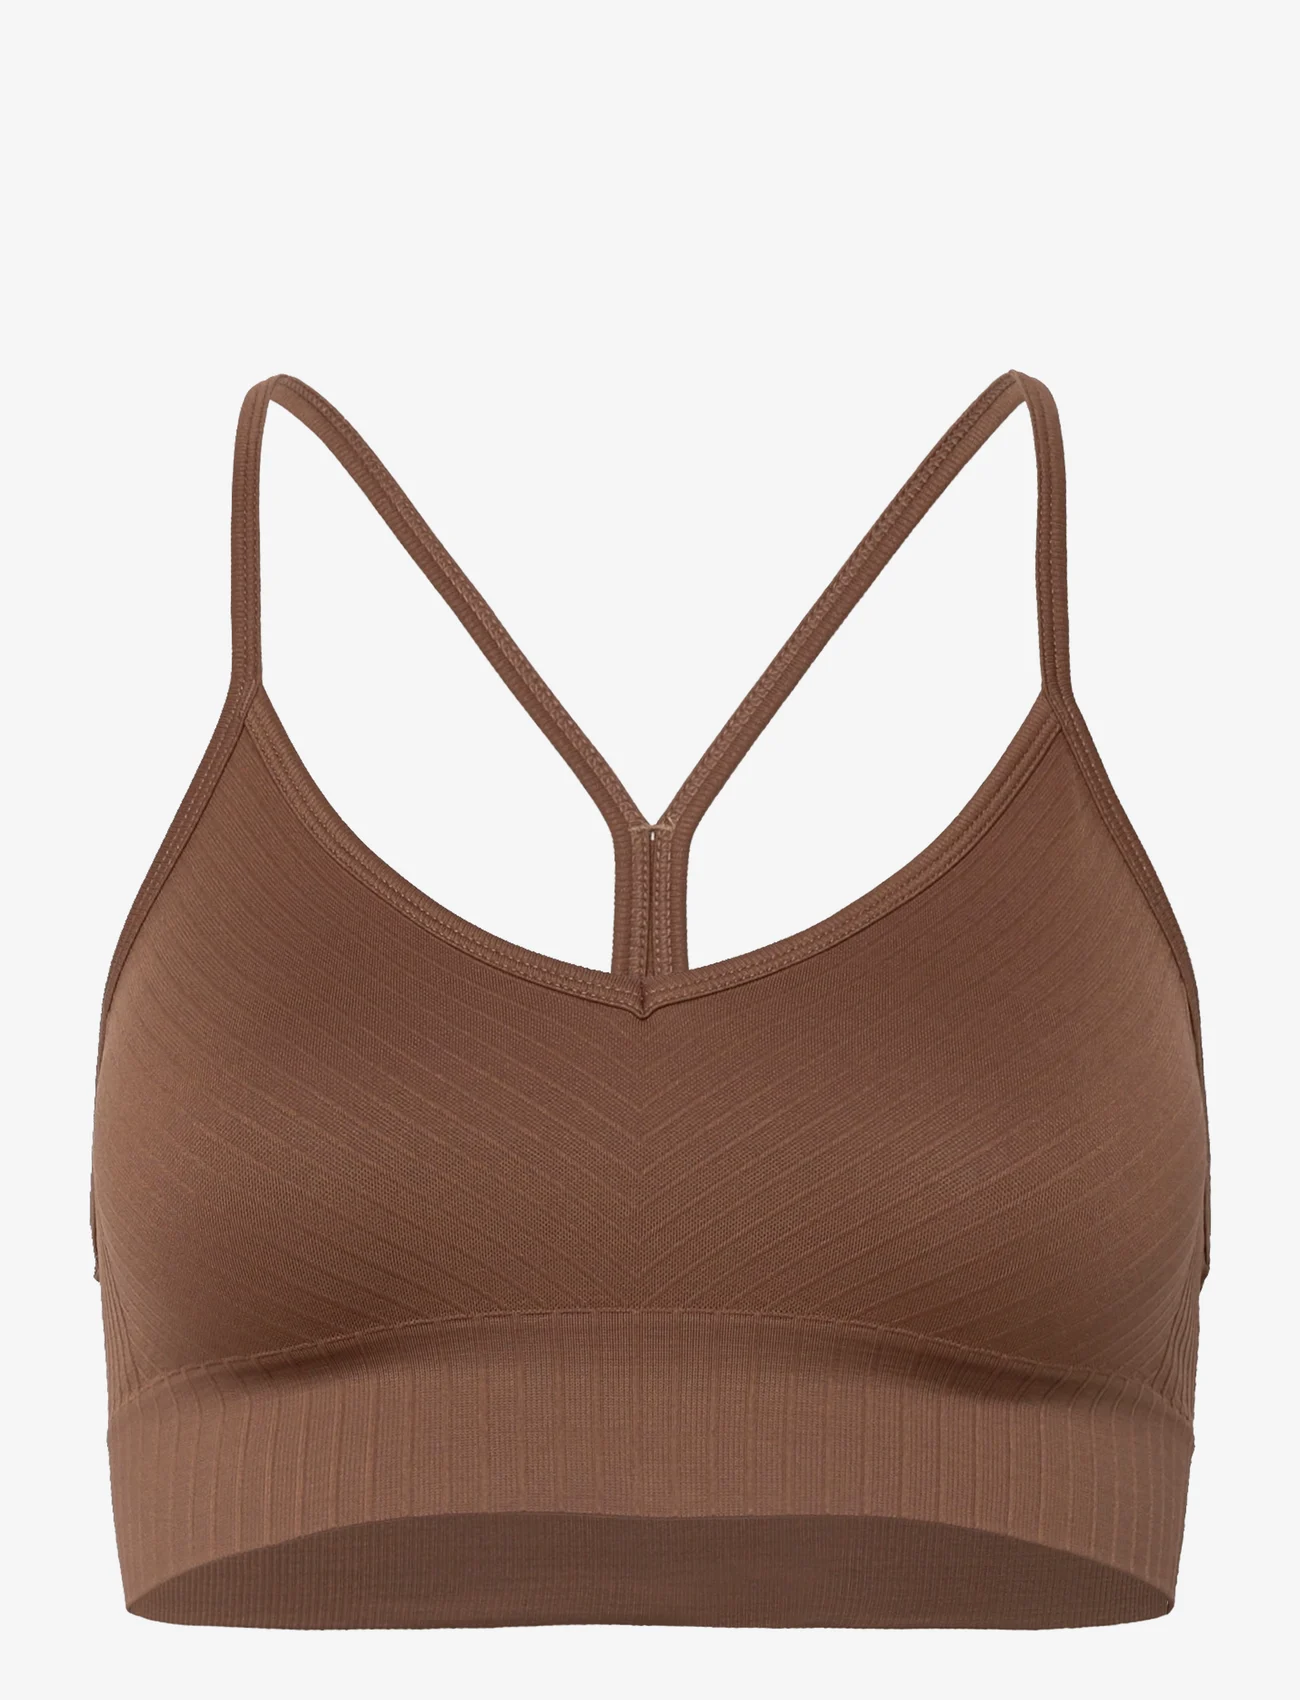 Casall - Seamless Graphical Rib Sports Top - sport bras - taupe brown - 0